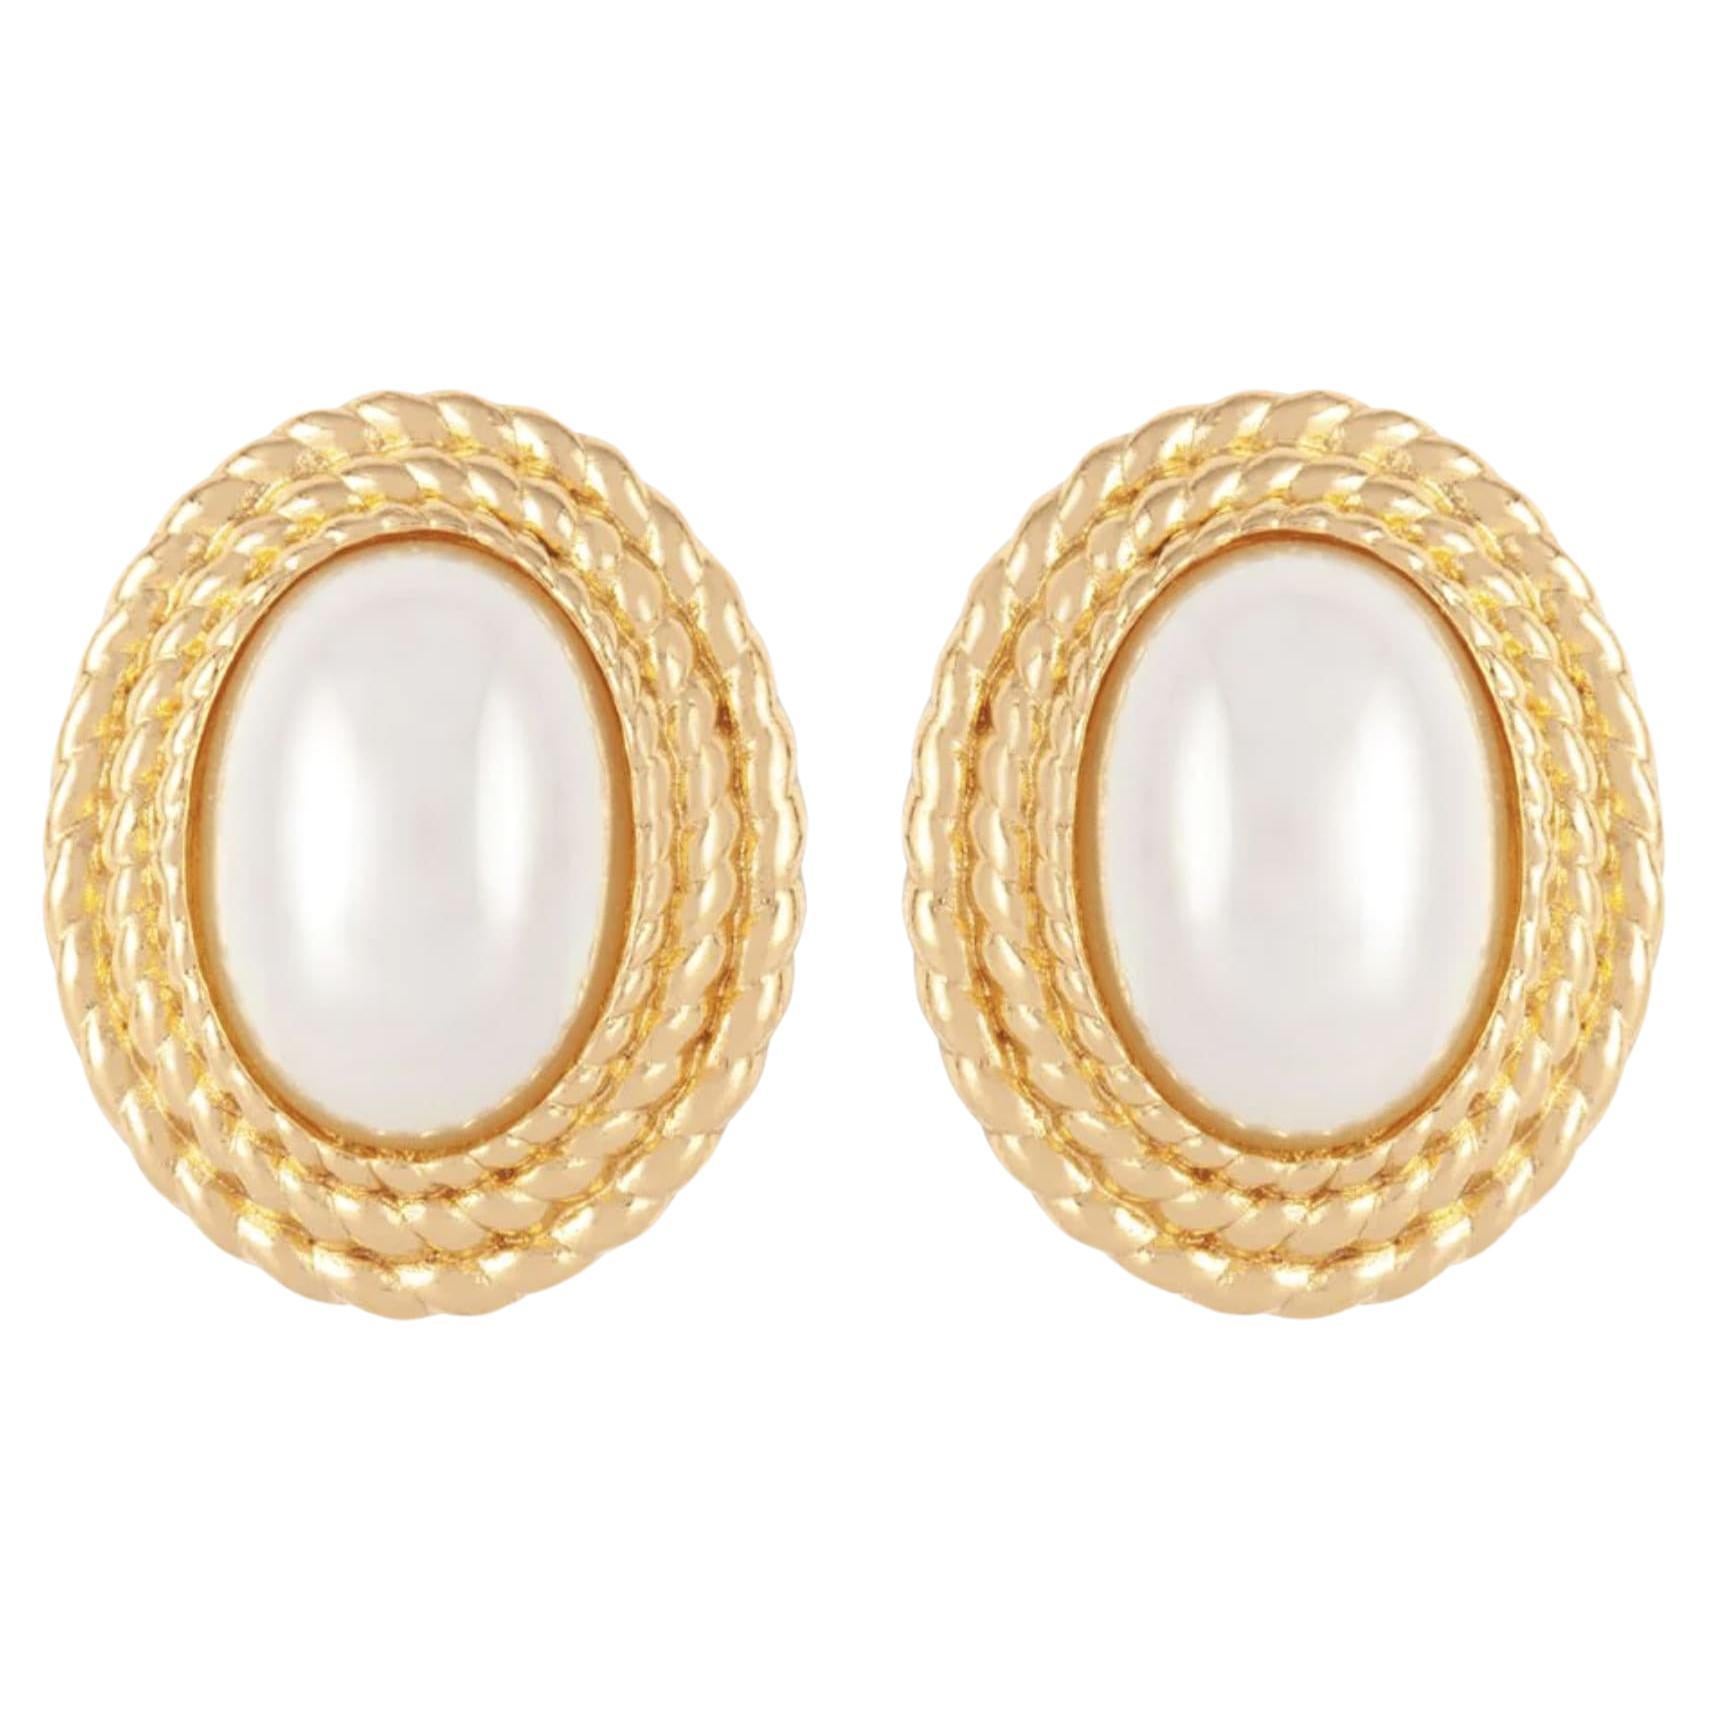 Christian Dior Vintage 1980s White Oval Pearl Triple Layer Swirl Braid Earrings For Sale